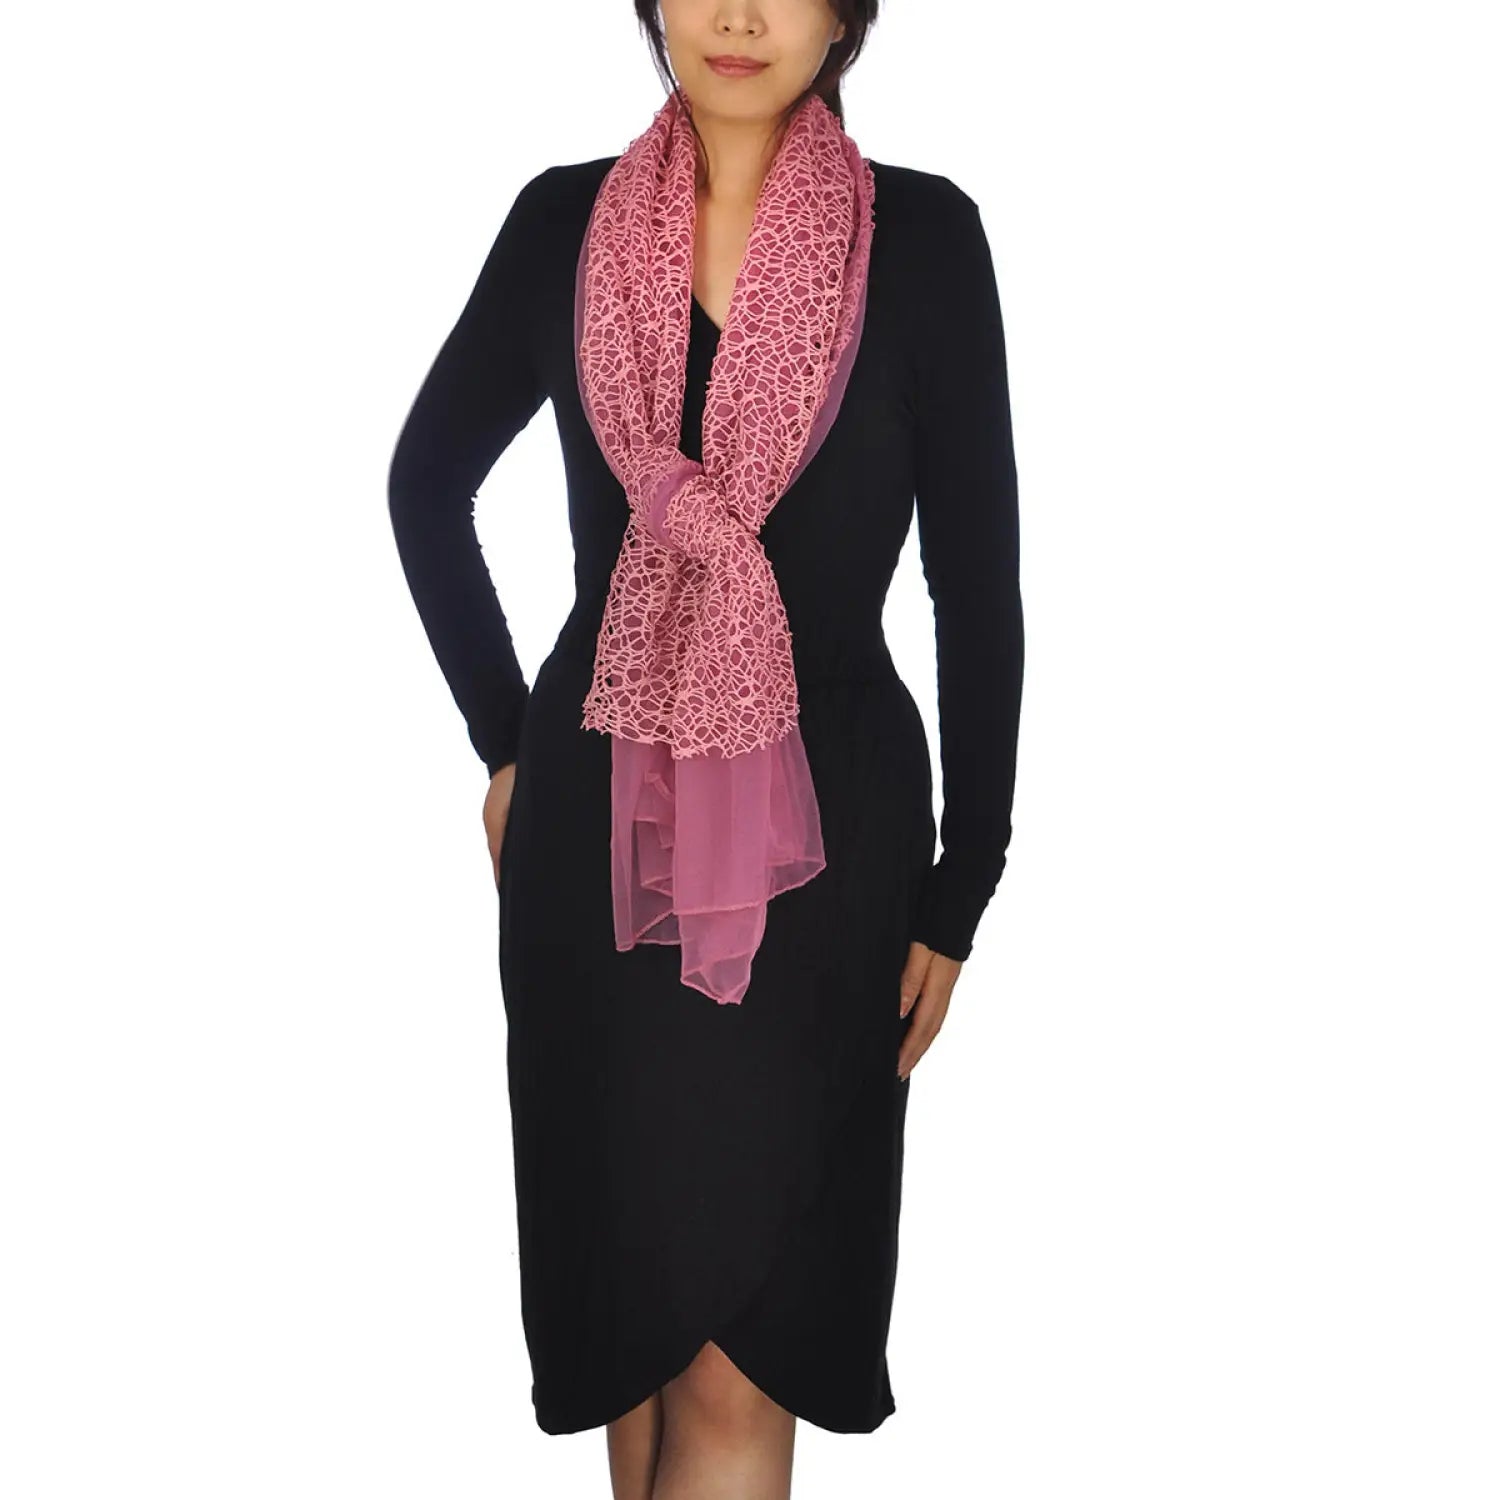 Chiffon cowl neck scarf with unique rope detailing being worn by a woman.